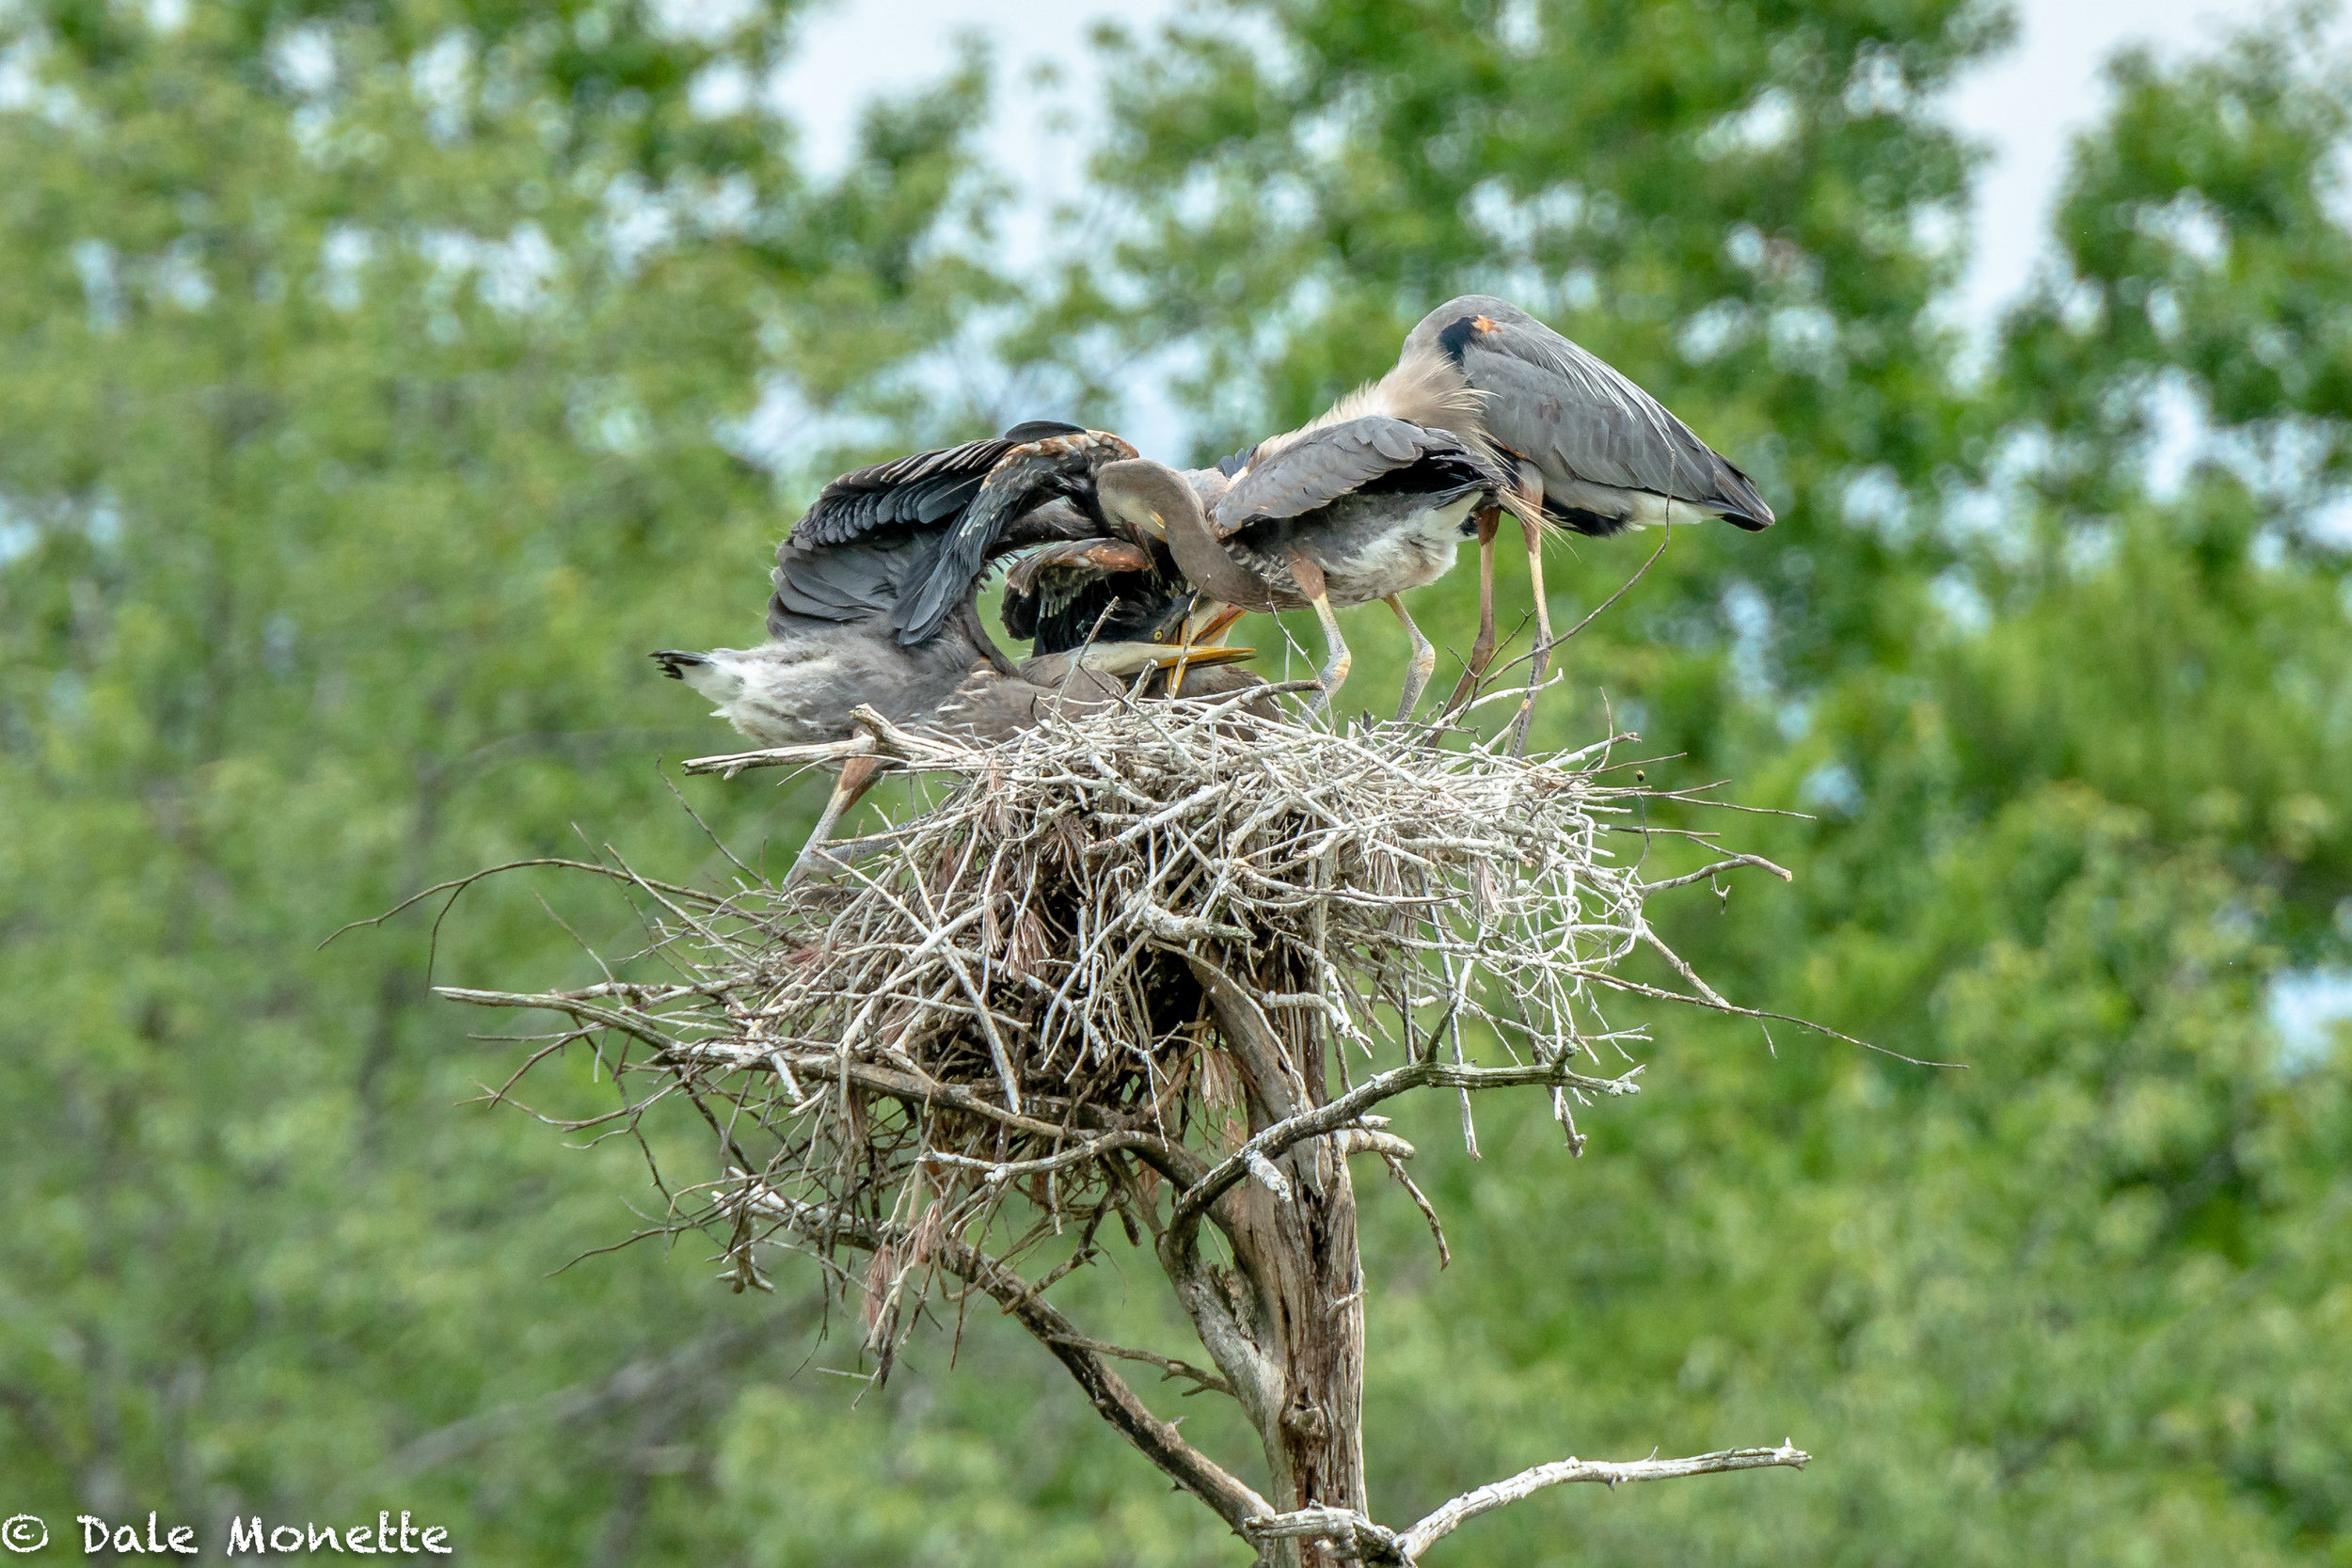   Here’s a photo I took in summer of 2016. There are 4 great blue herons in the nest. An adult and 3 chicks at feeding time. Can you see the chick on the bottom upside down trying to catch some fish from mom ?  